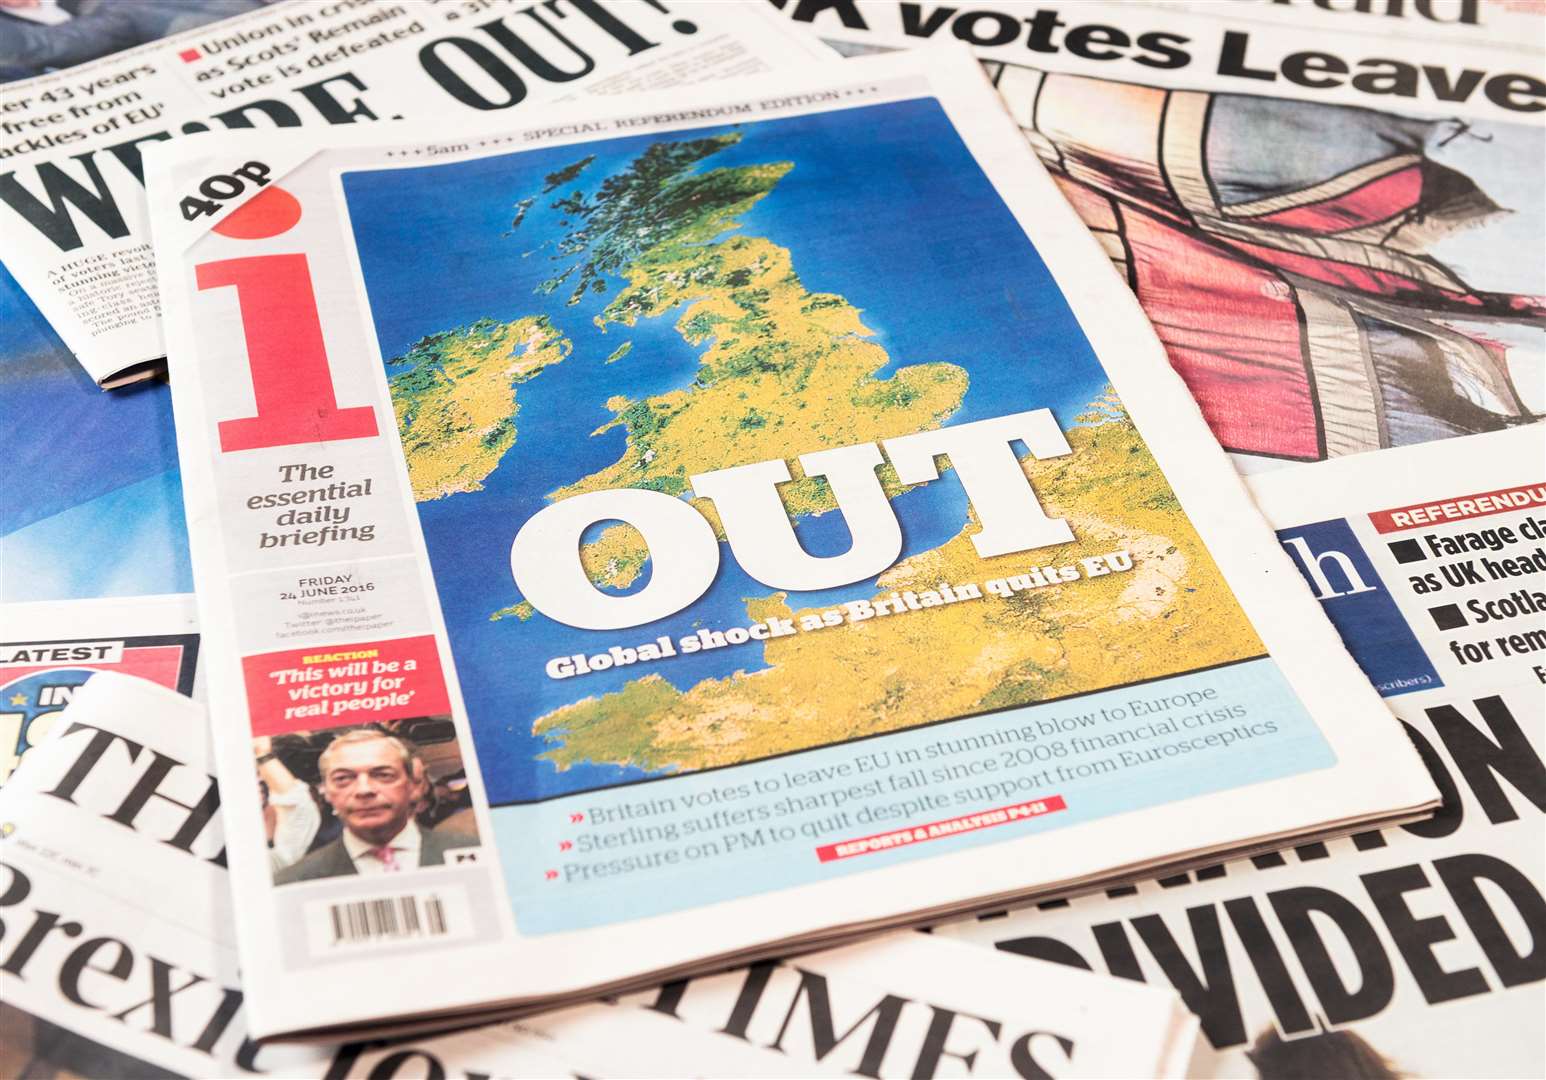 The front pages of British newspapers on the day after the Brexit referendum in 2016